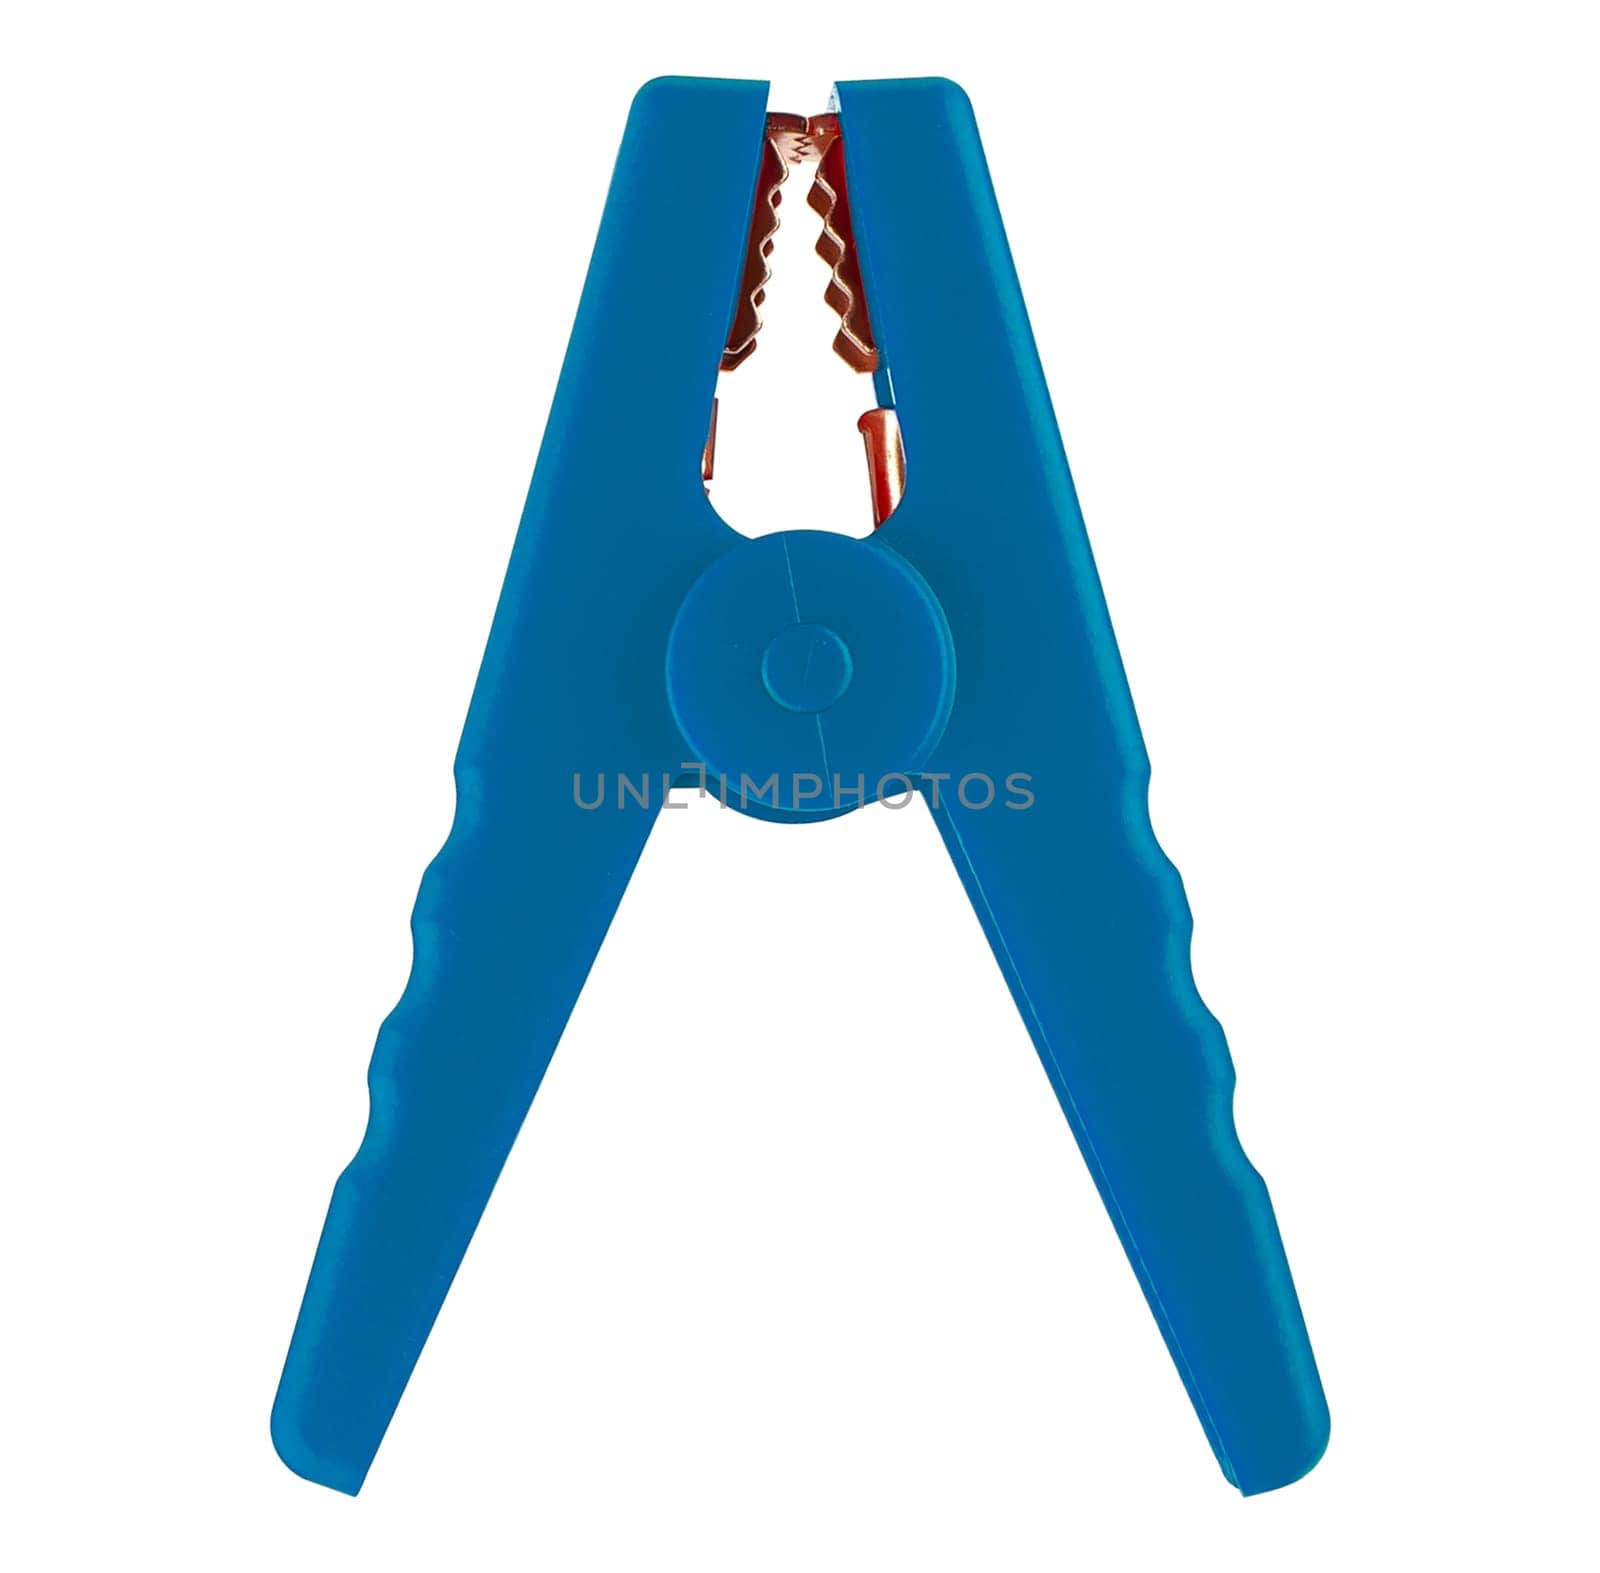 Clamps for electrical terminals white background in insulation